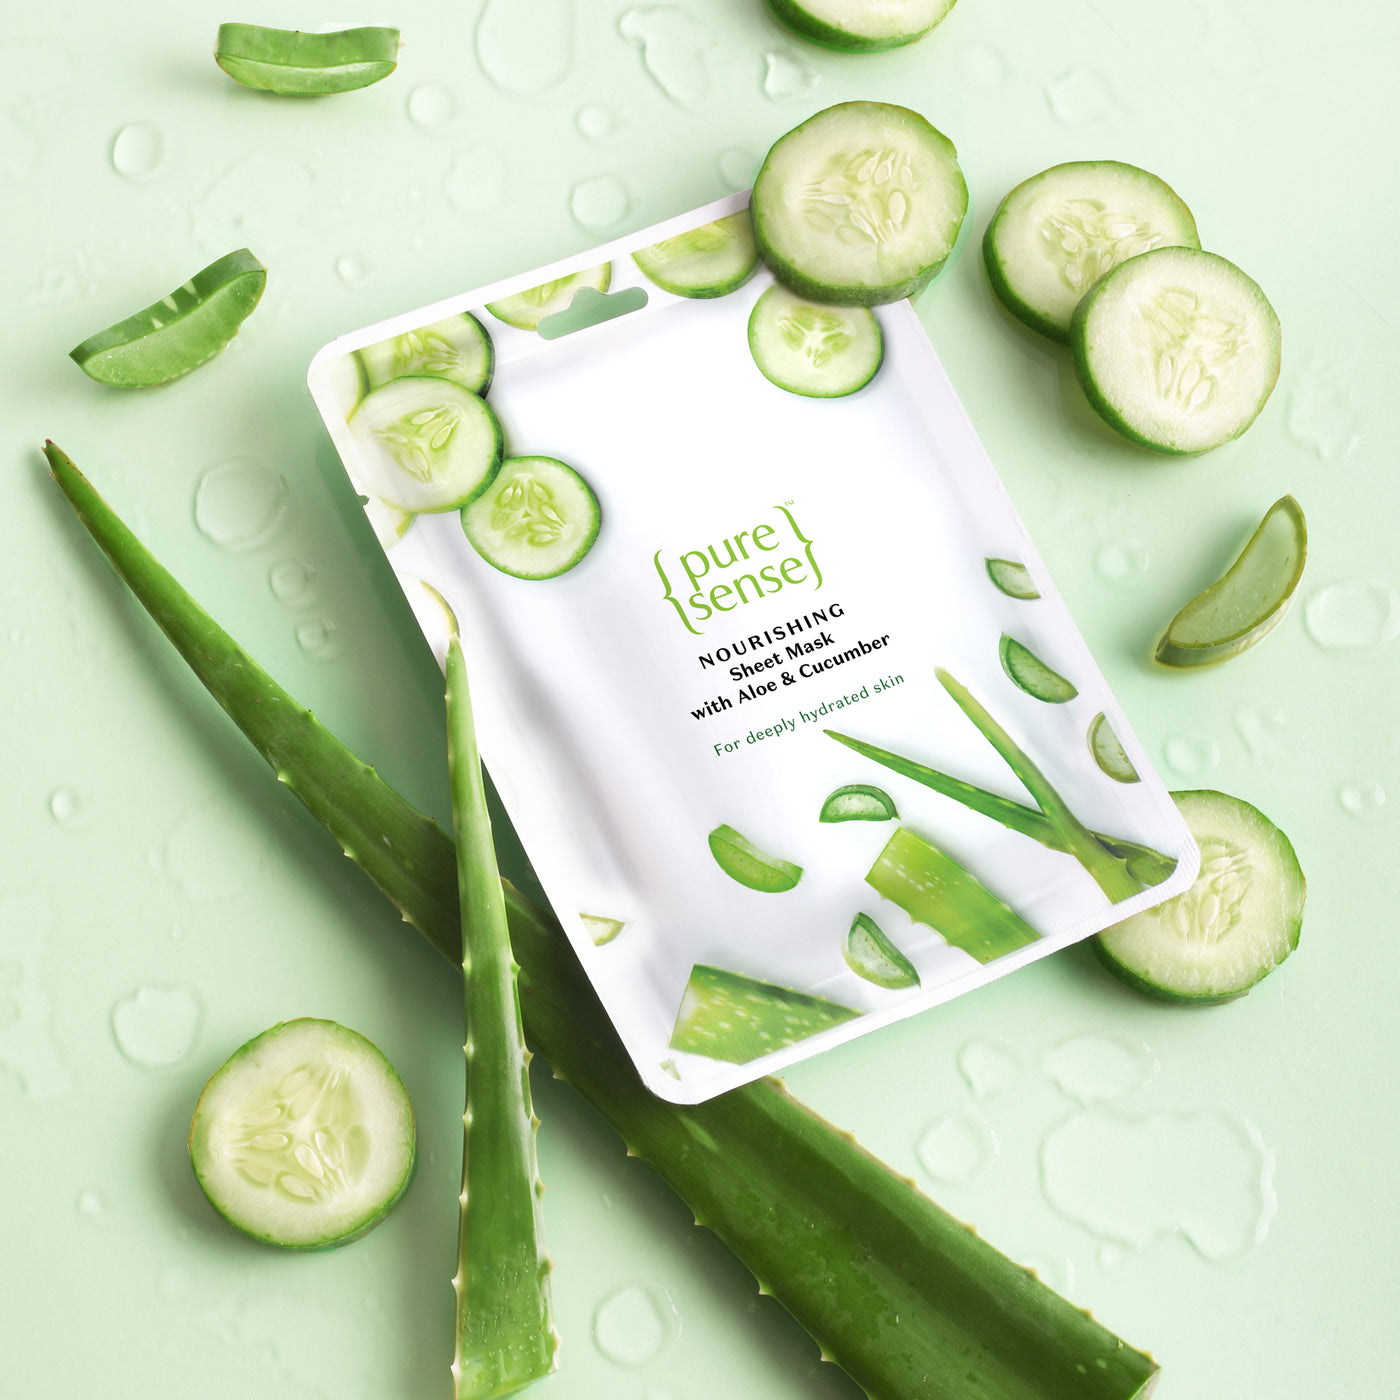 Nourishing Sheet Mask with Aloe Vera & Cucumber | From the makers of Parachute Advansed | 15ml - PureSense